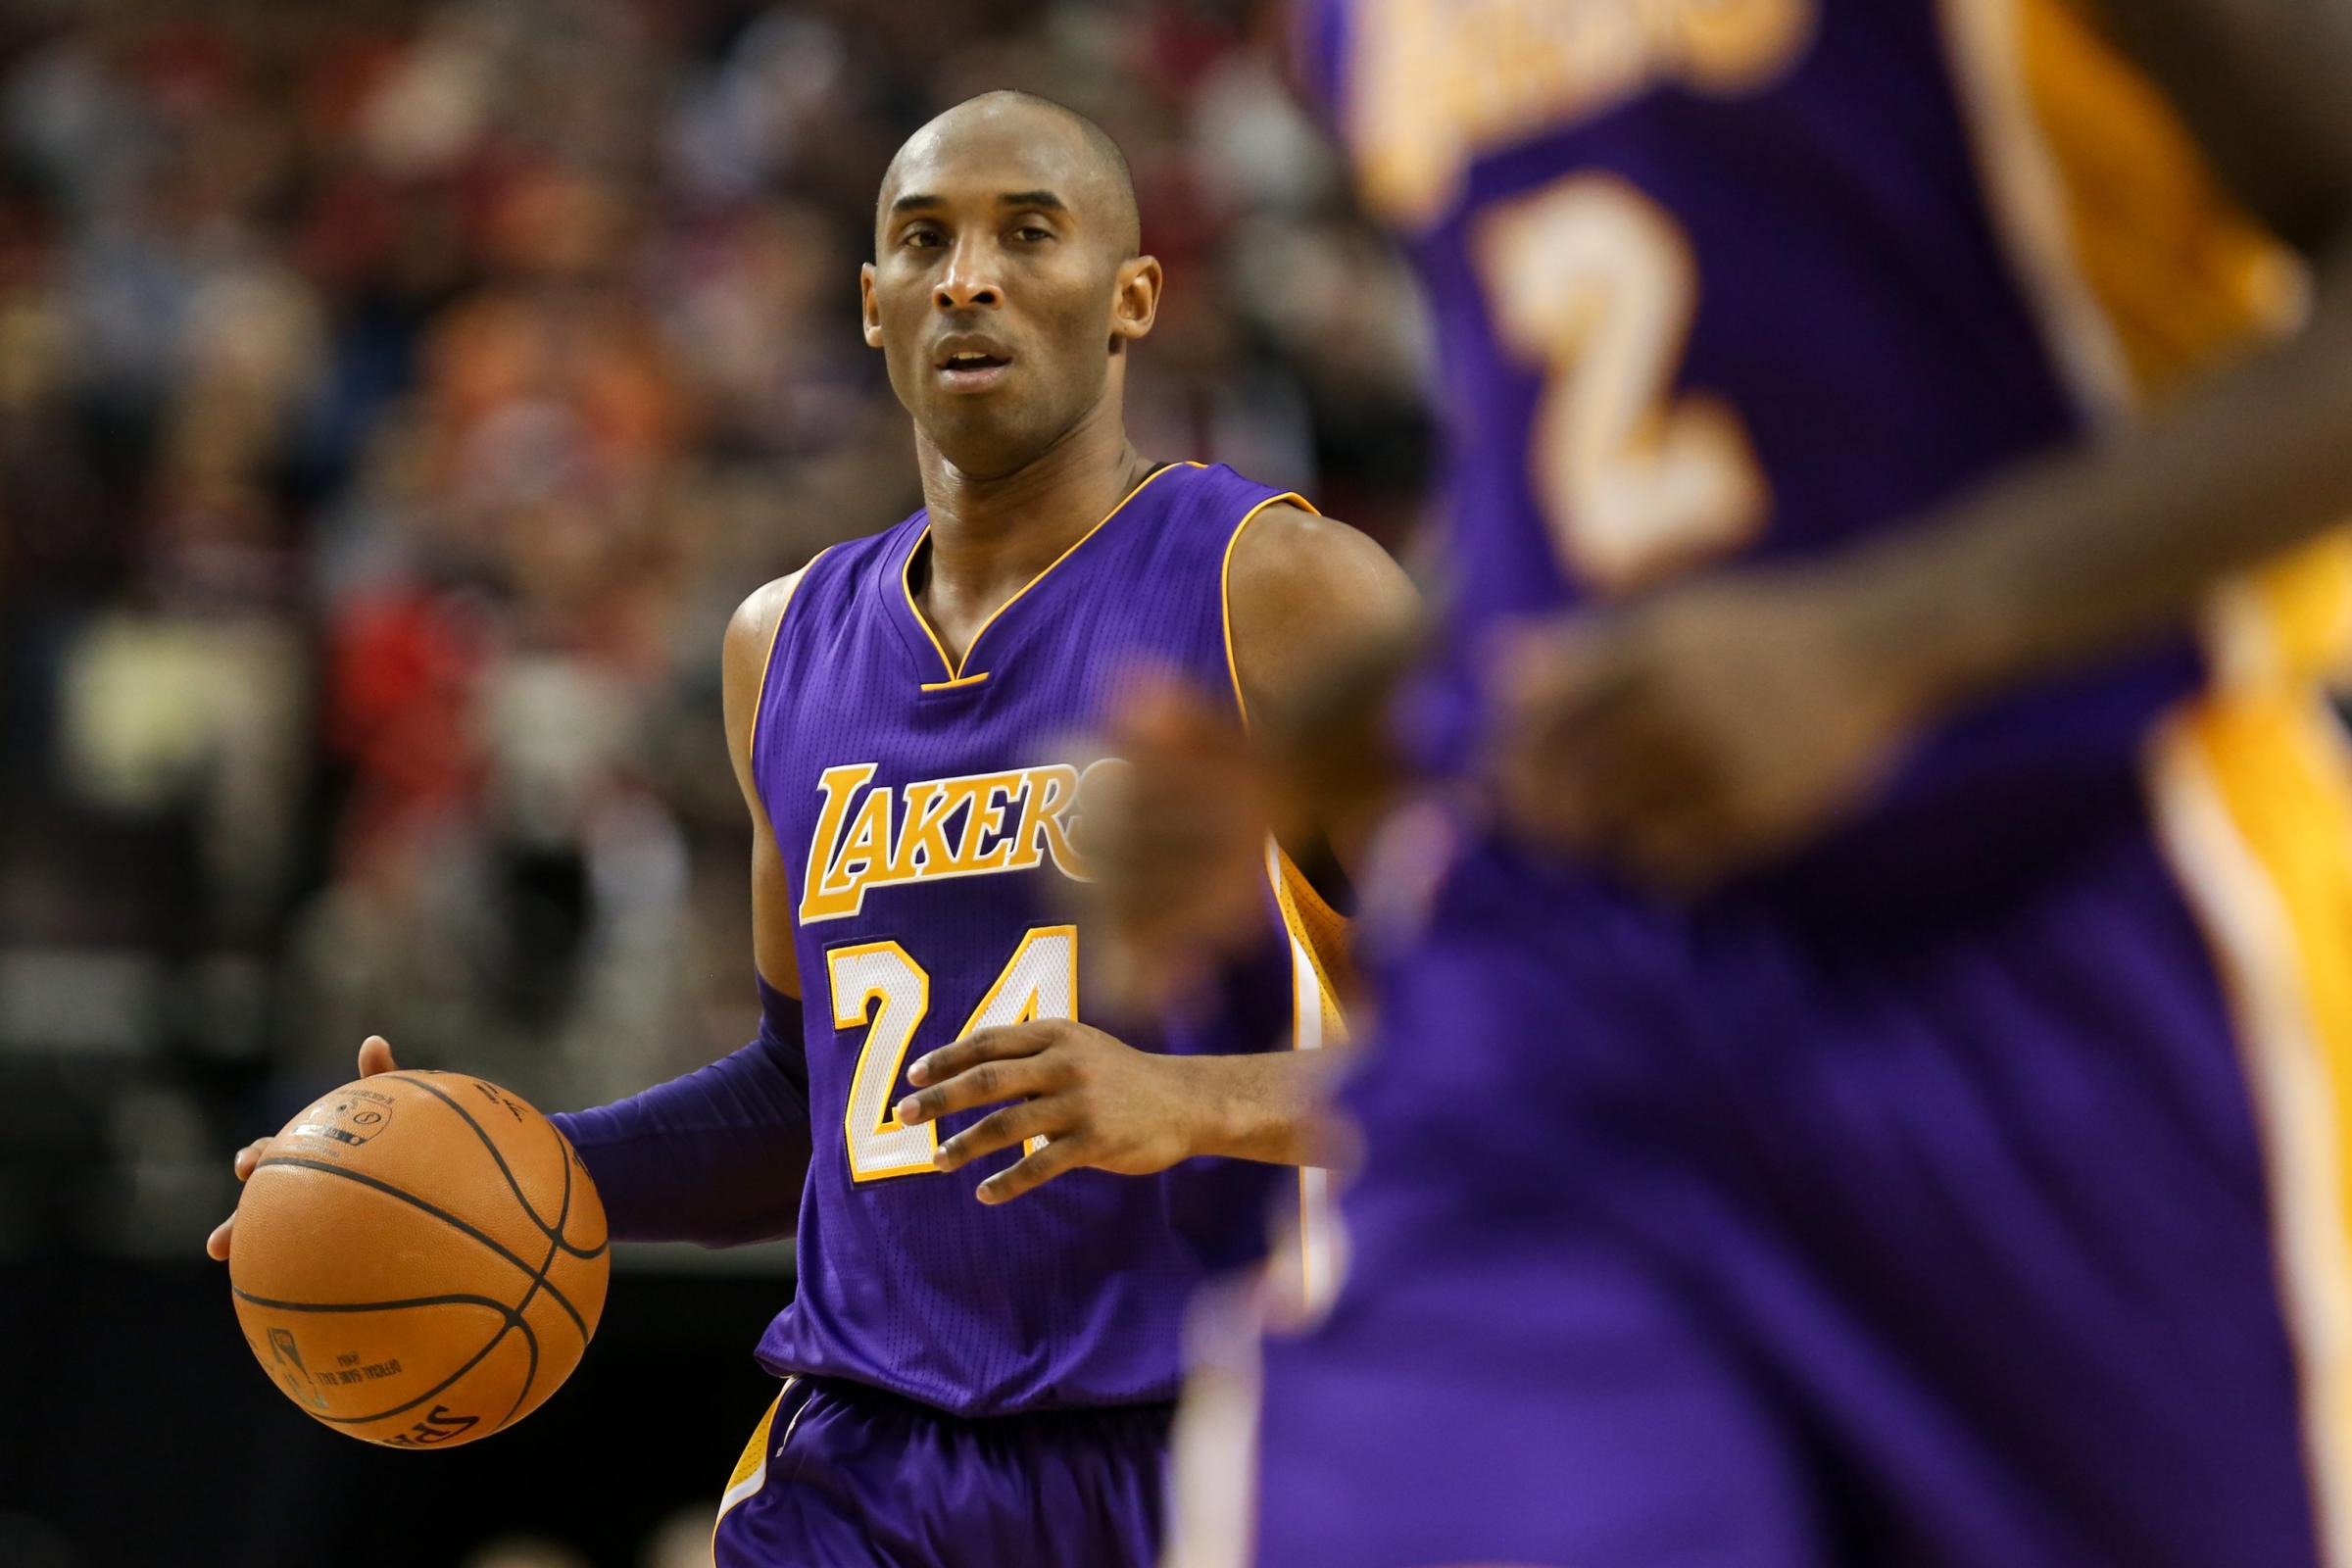 Nov. 28, 2015 - KOBE BRYANT (24) looks to pass. The Portland Trailblazers hosted the Los Angeles Lakers at the Moda Center on November 28th, 2015. Photo by David Blair (Cal Sport Media via AP Images)